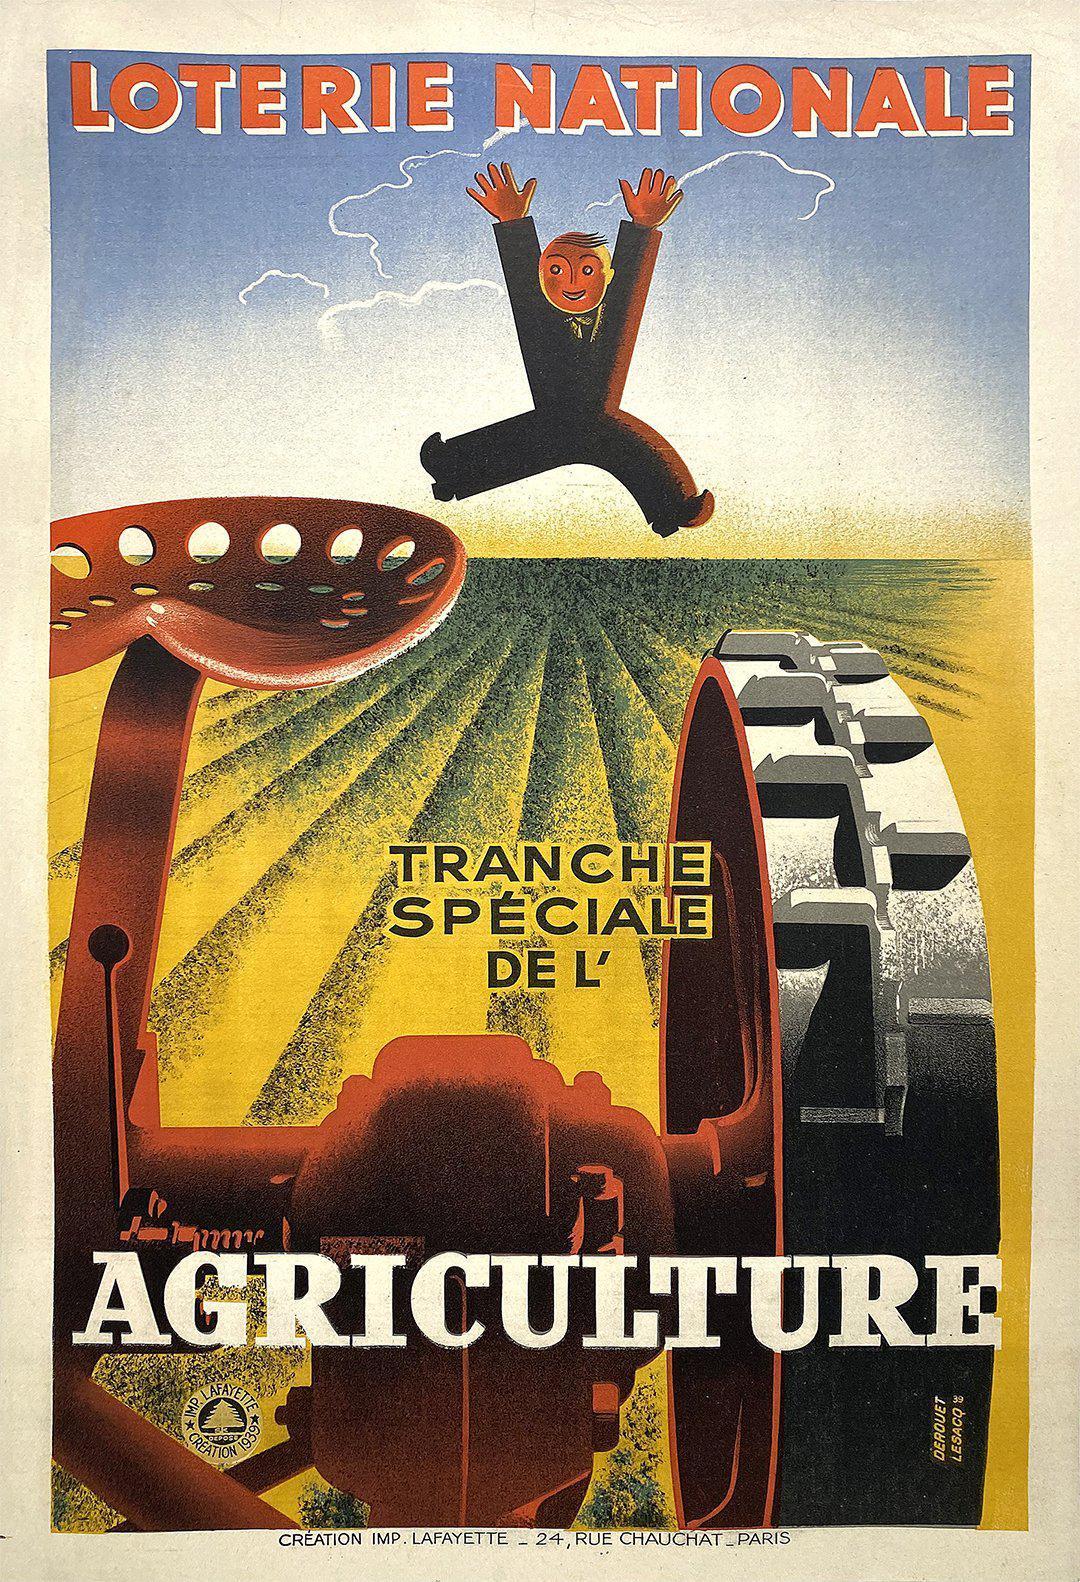 Original Vintage French Loterie Nationale Poster Agriculture by Derouet Lasacq 1939